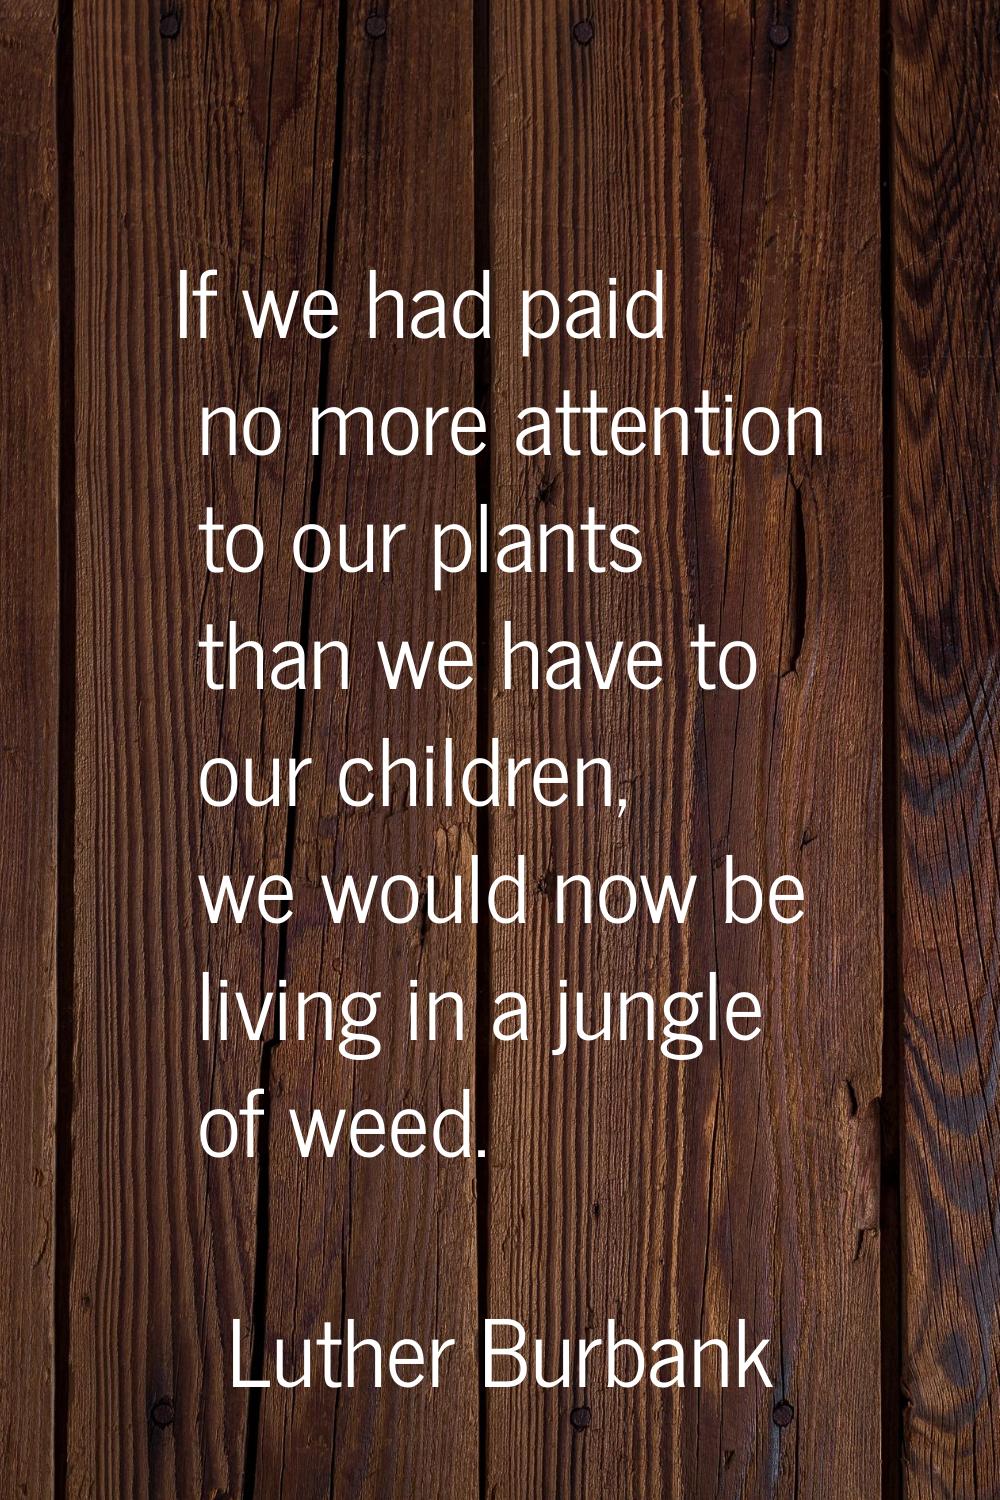 If we had paid no more attention to our plants than we have to our children, we would now be living